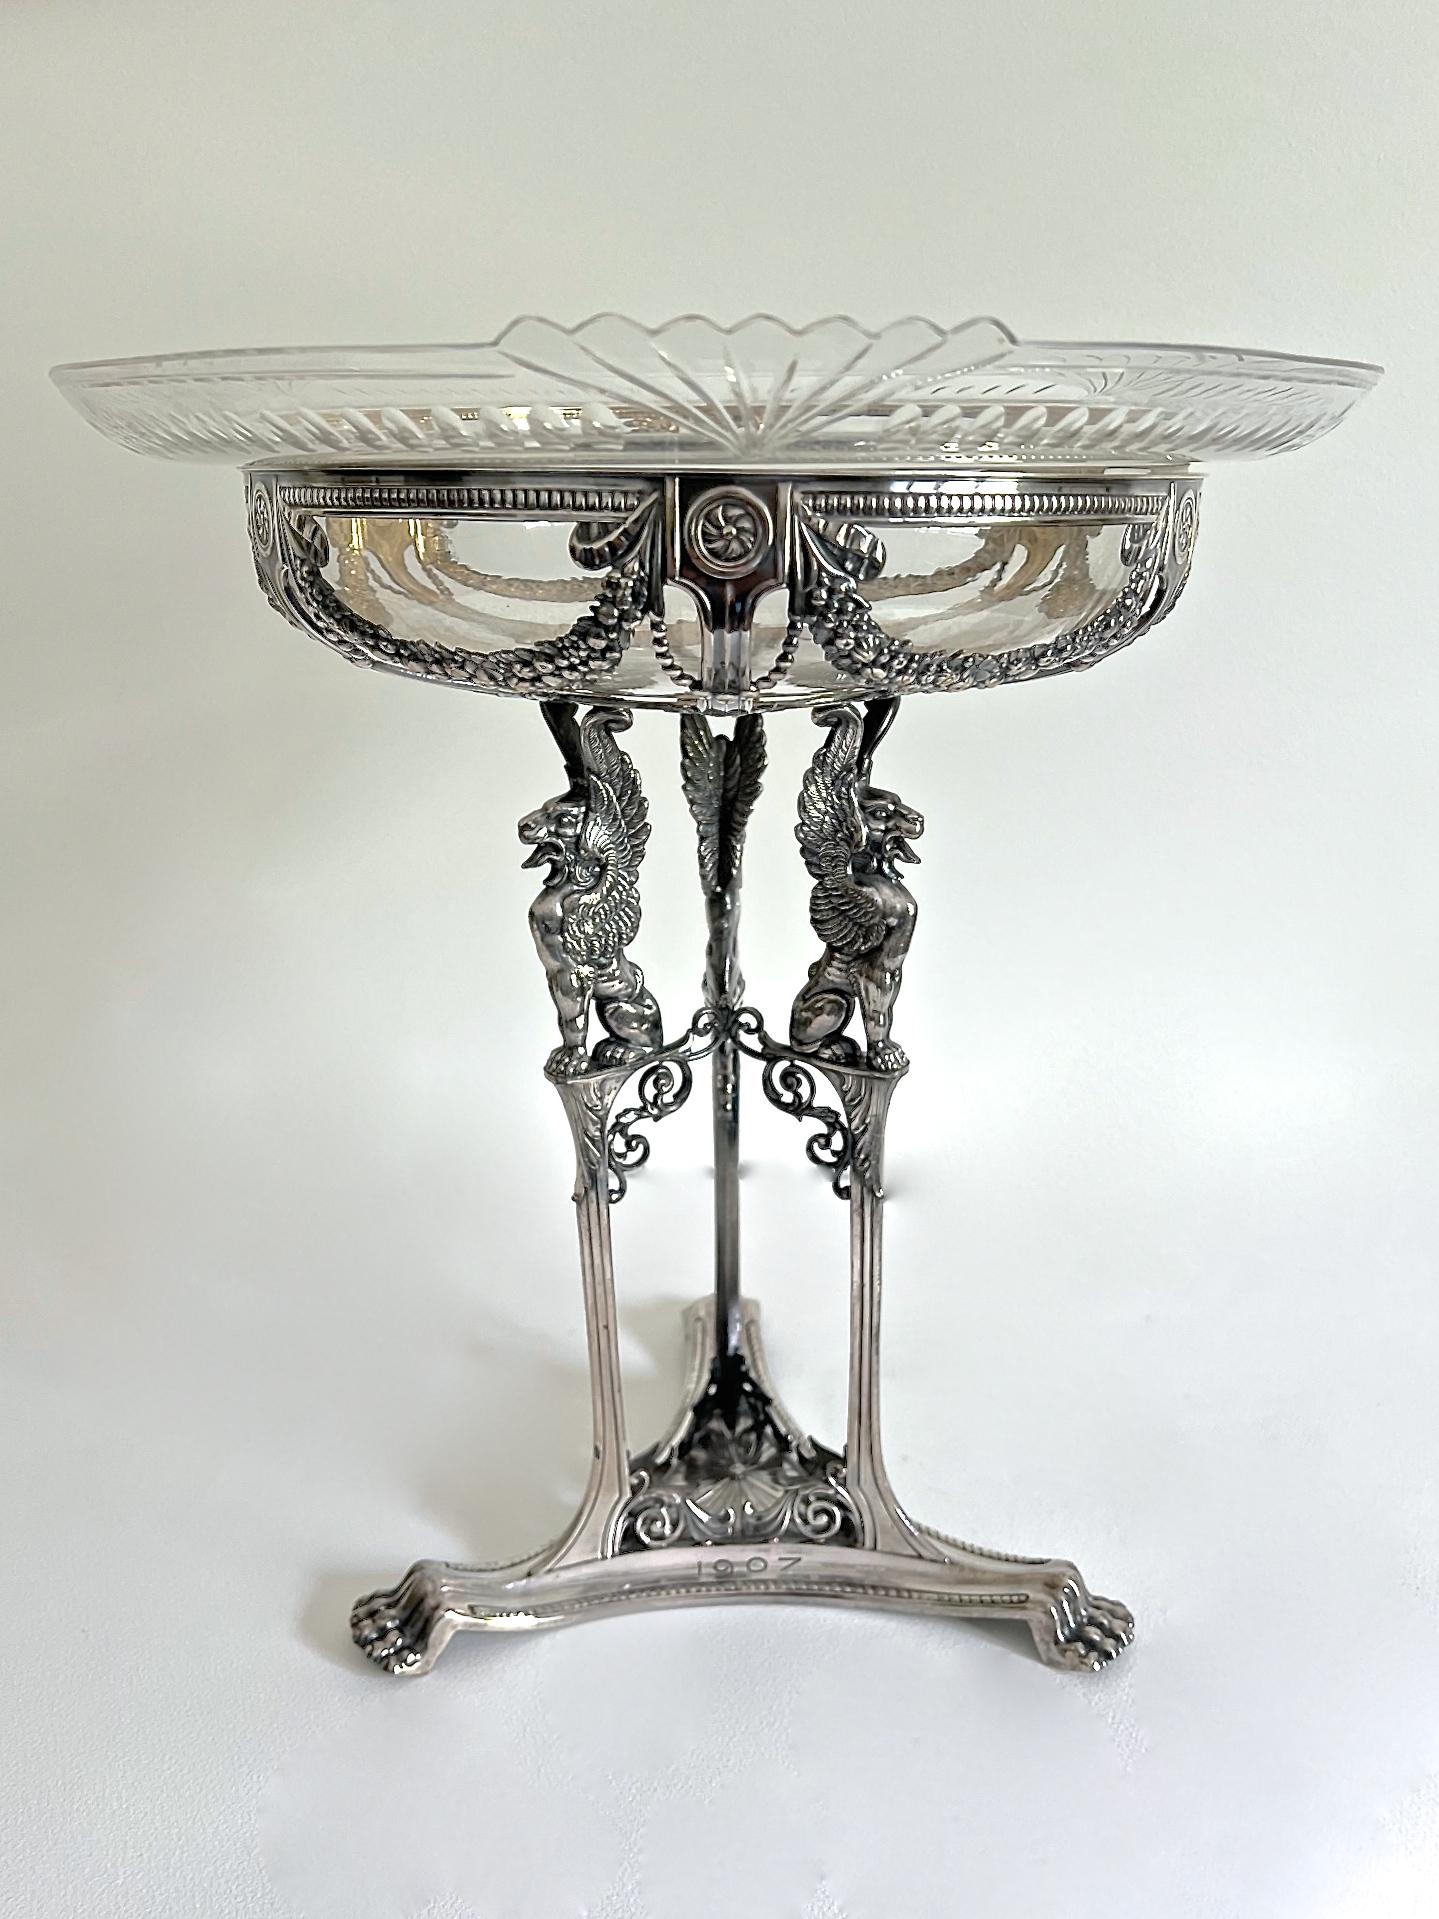 A stunning WMF silvered metal & cut glass centerpiece in the Neo Classical style. The tripod stand cast with Classical motifs such as floral swags, Gryphons, paterae, scrollwork, beading and lion paw feet. The interior is gilt washed. The stand